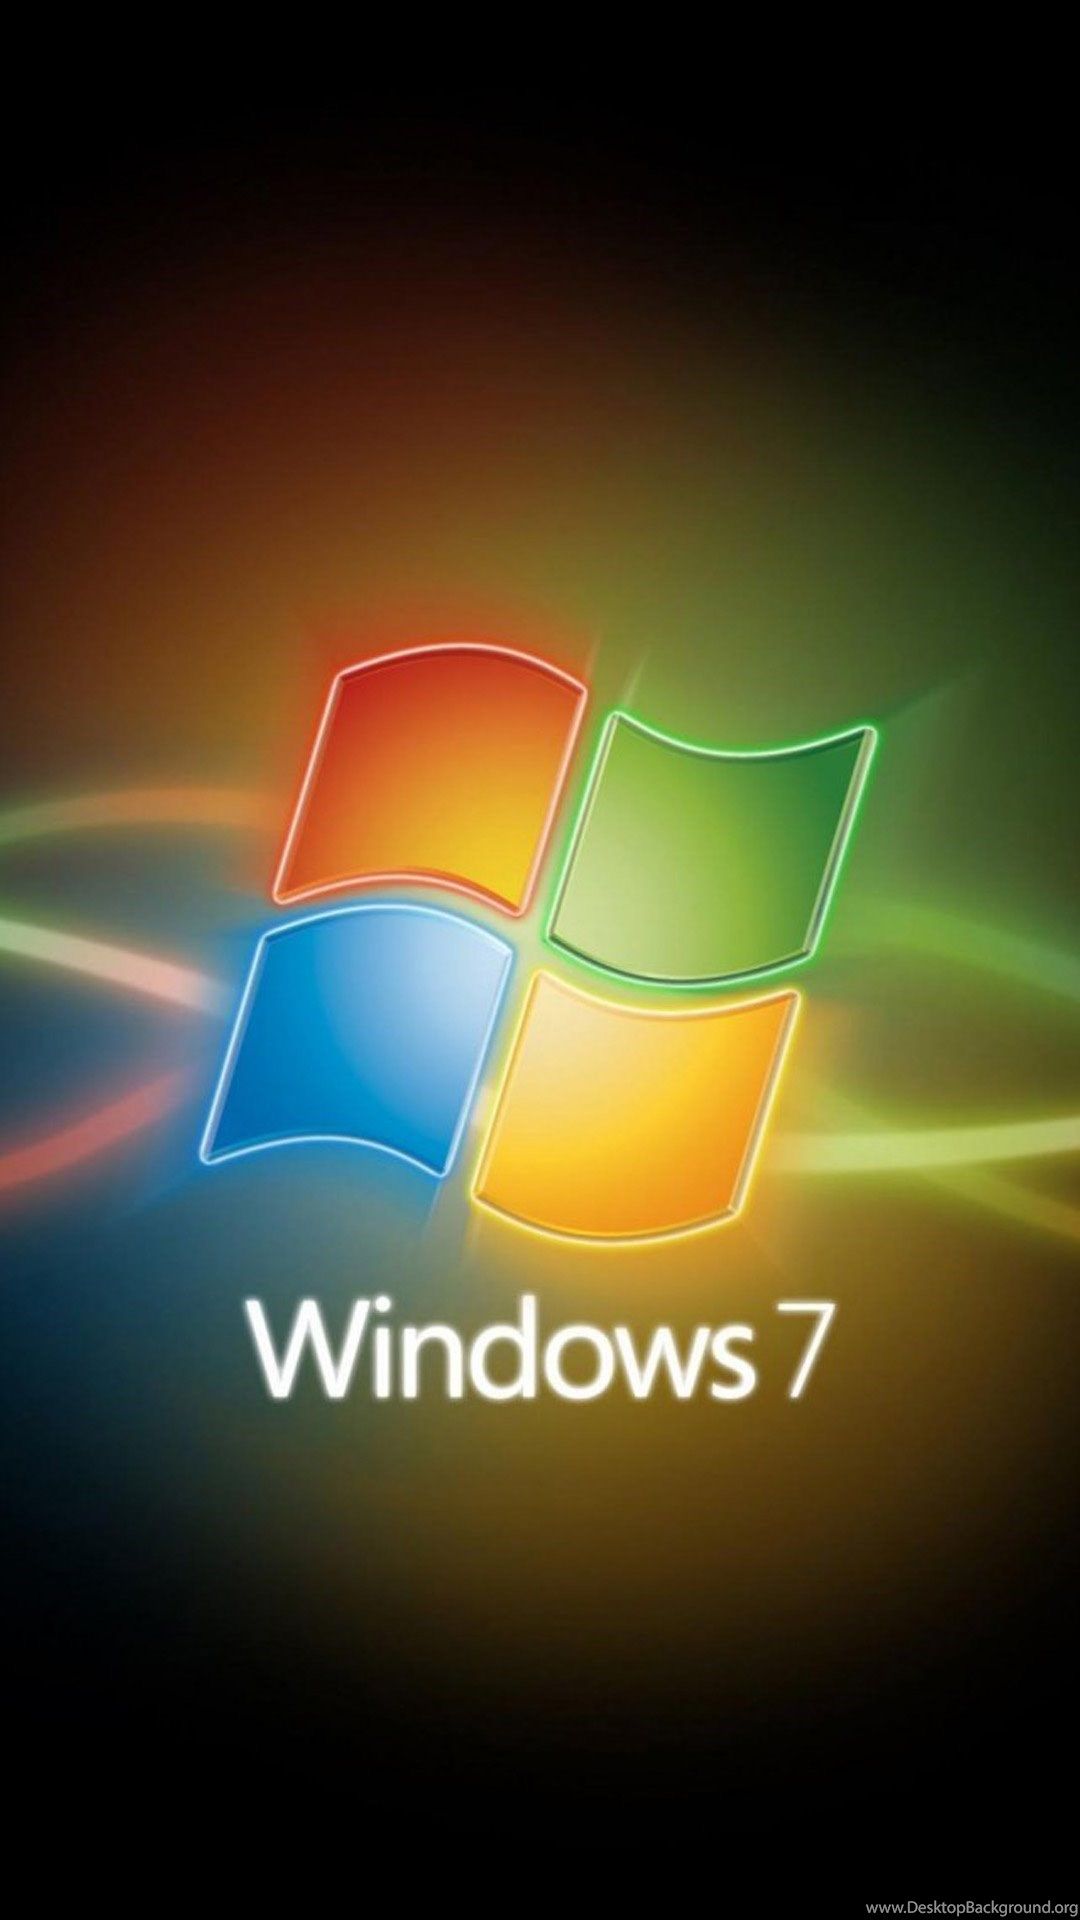 Android Logo Windows 7 HD Wallpapers - Wallpaper Cave